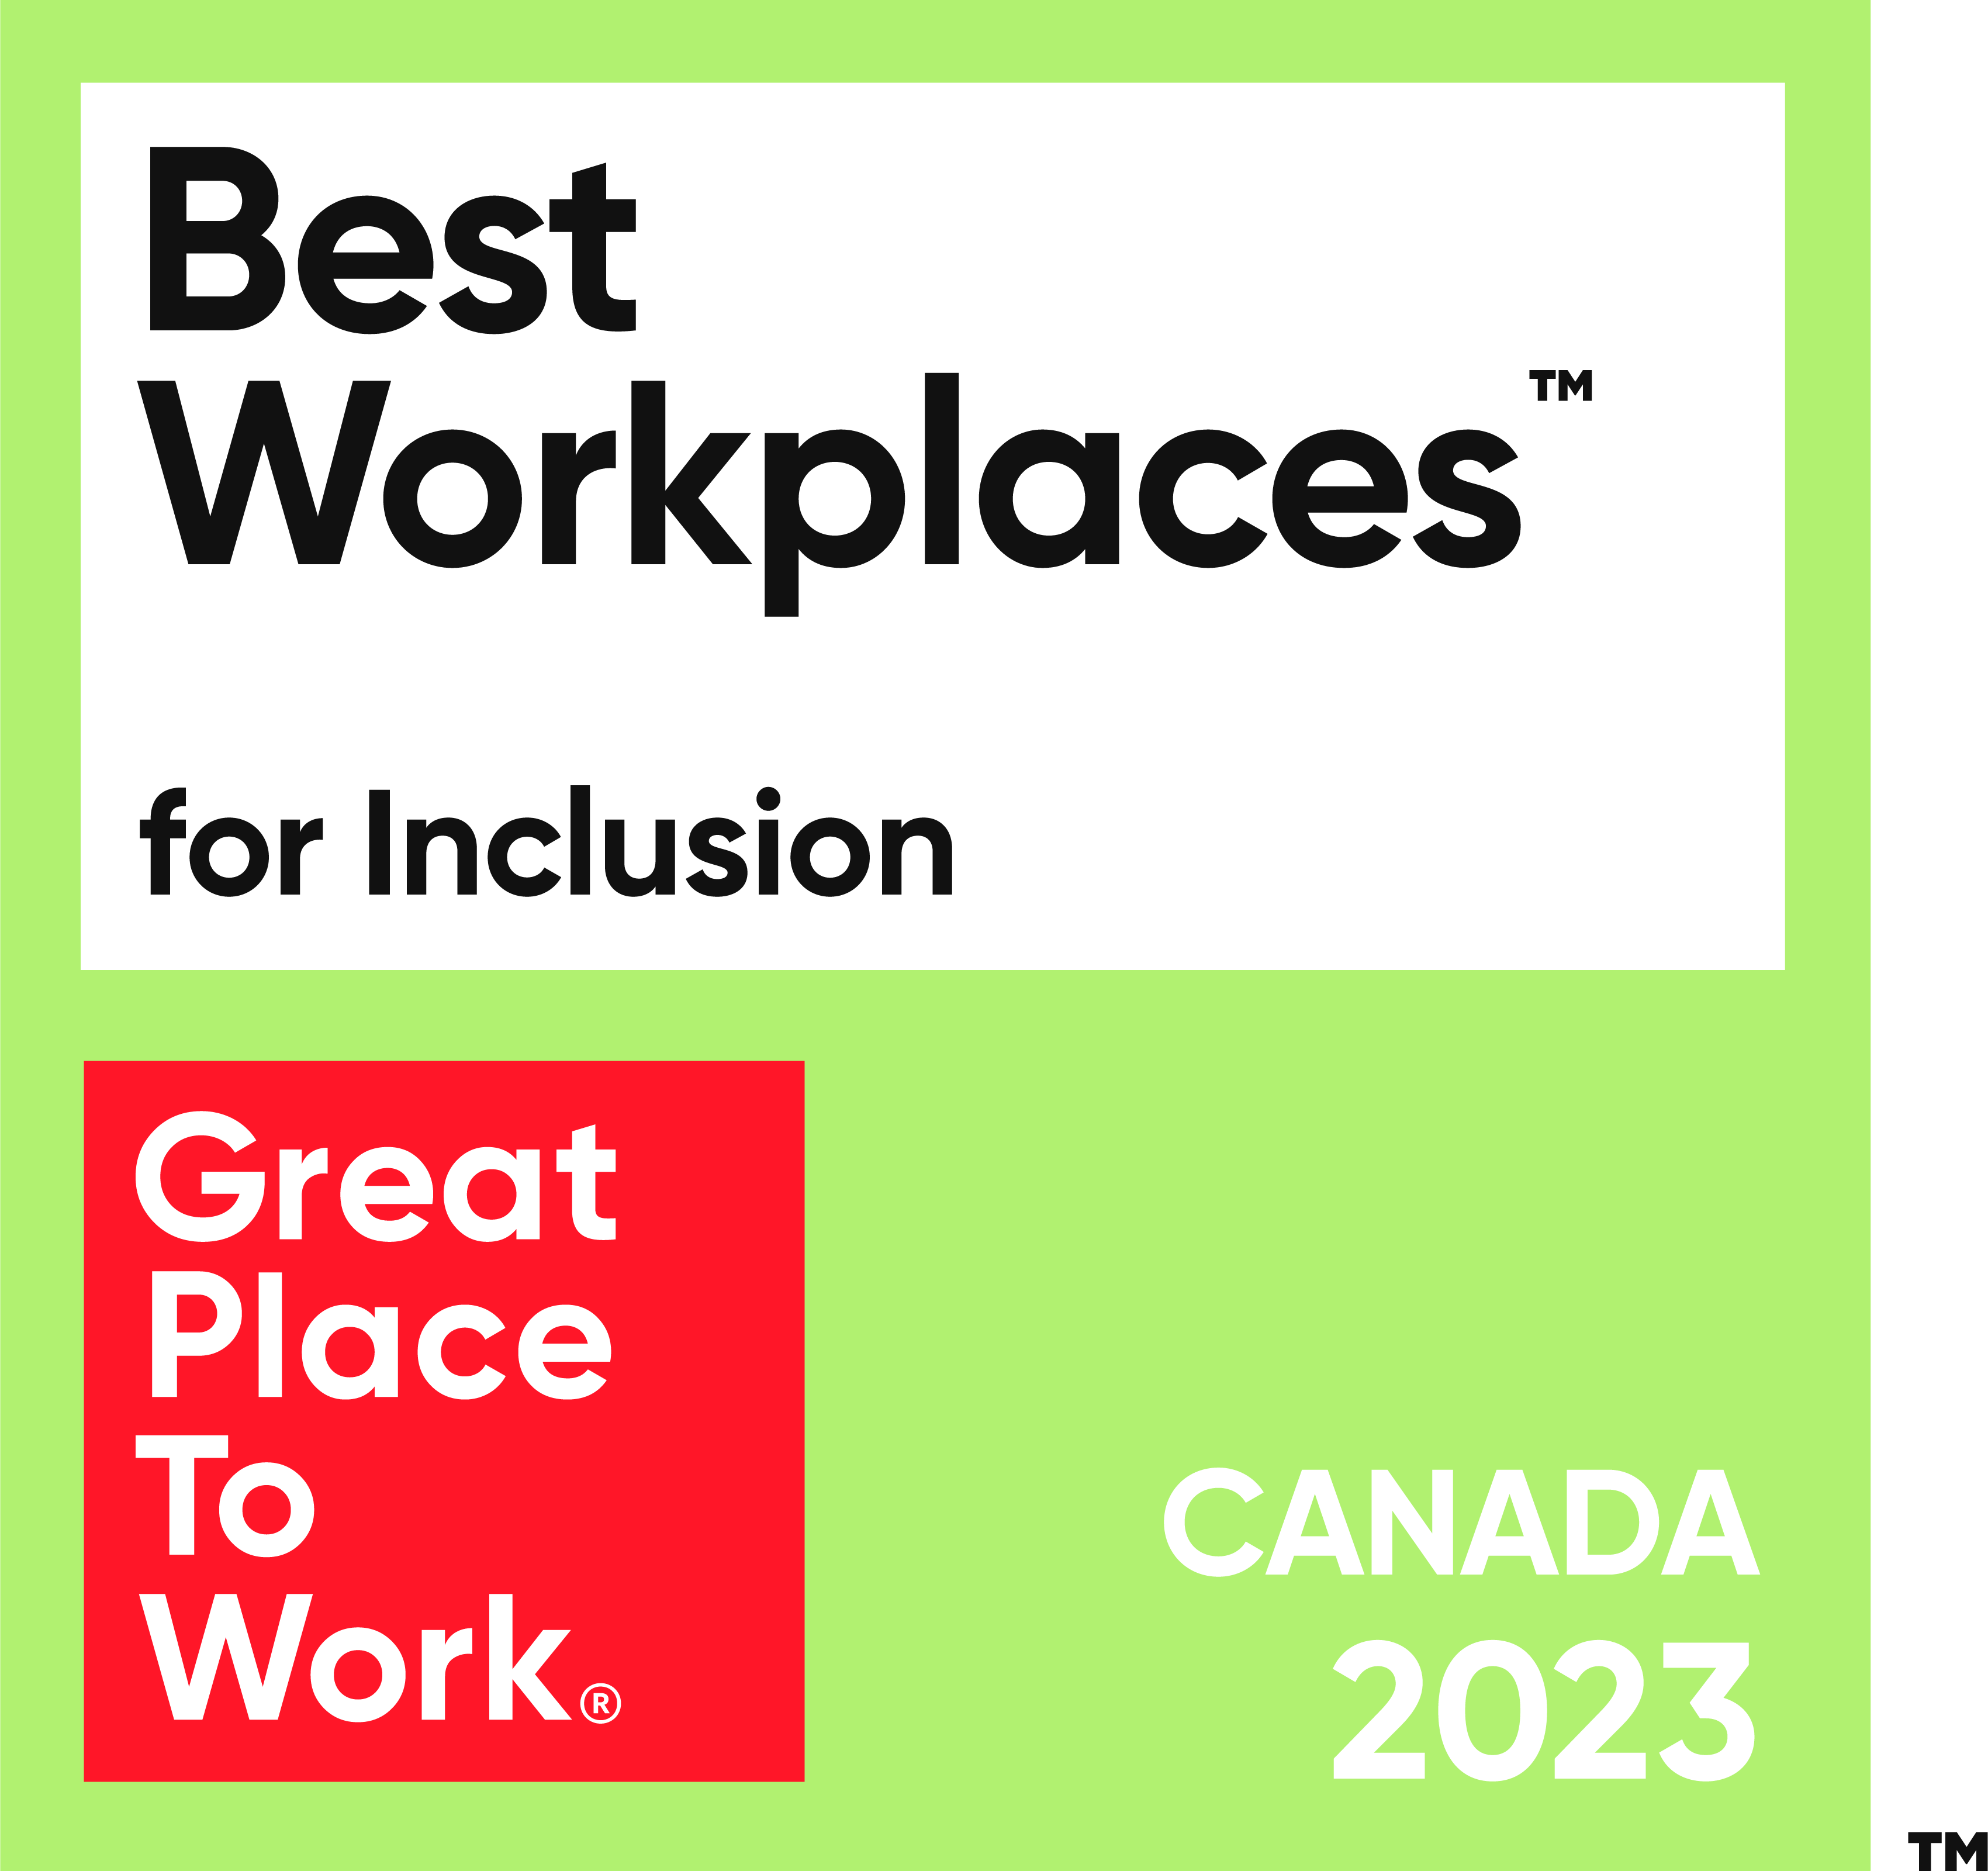 EY - Best Workplaces to work in Canada 2023